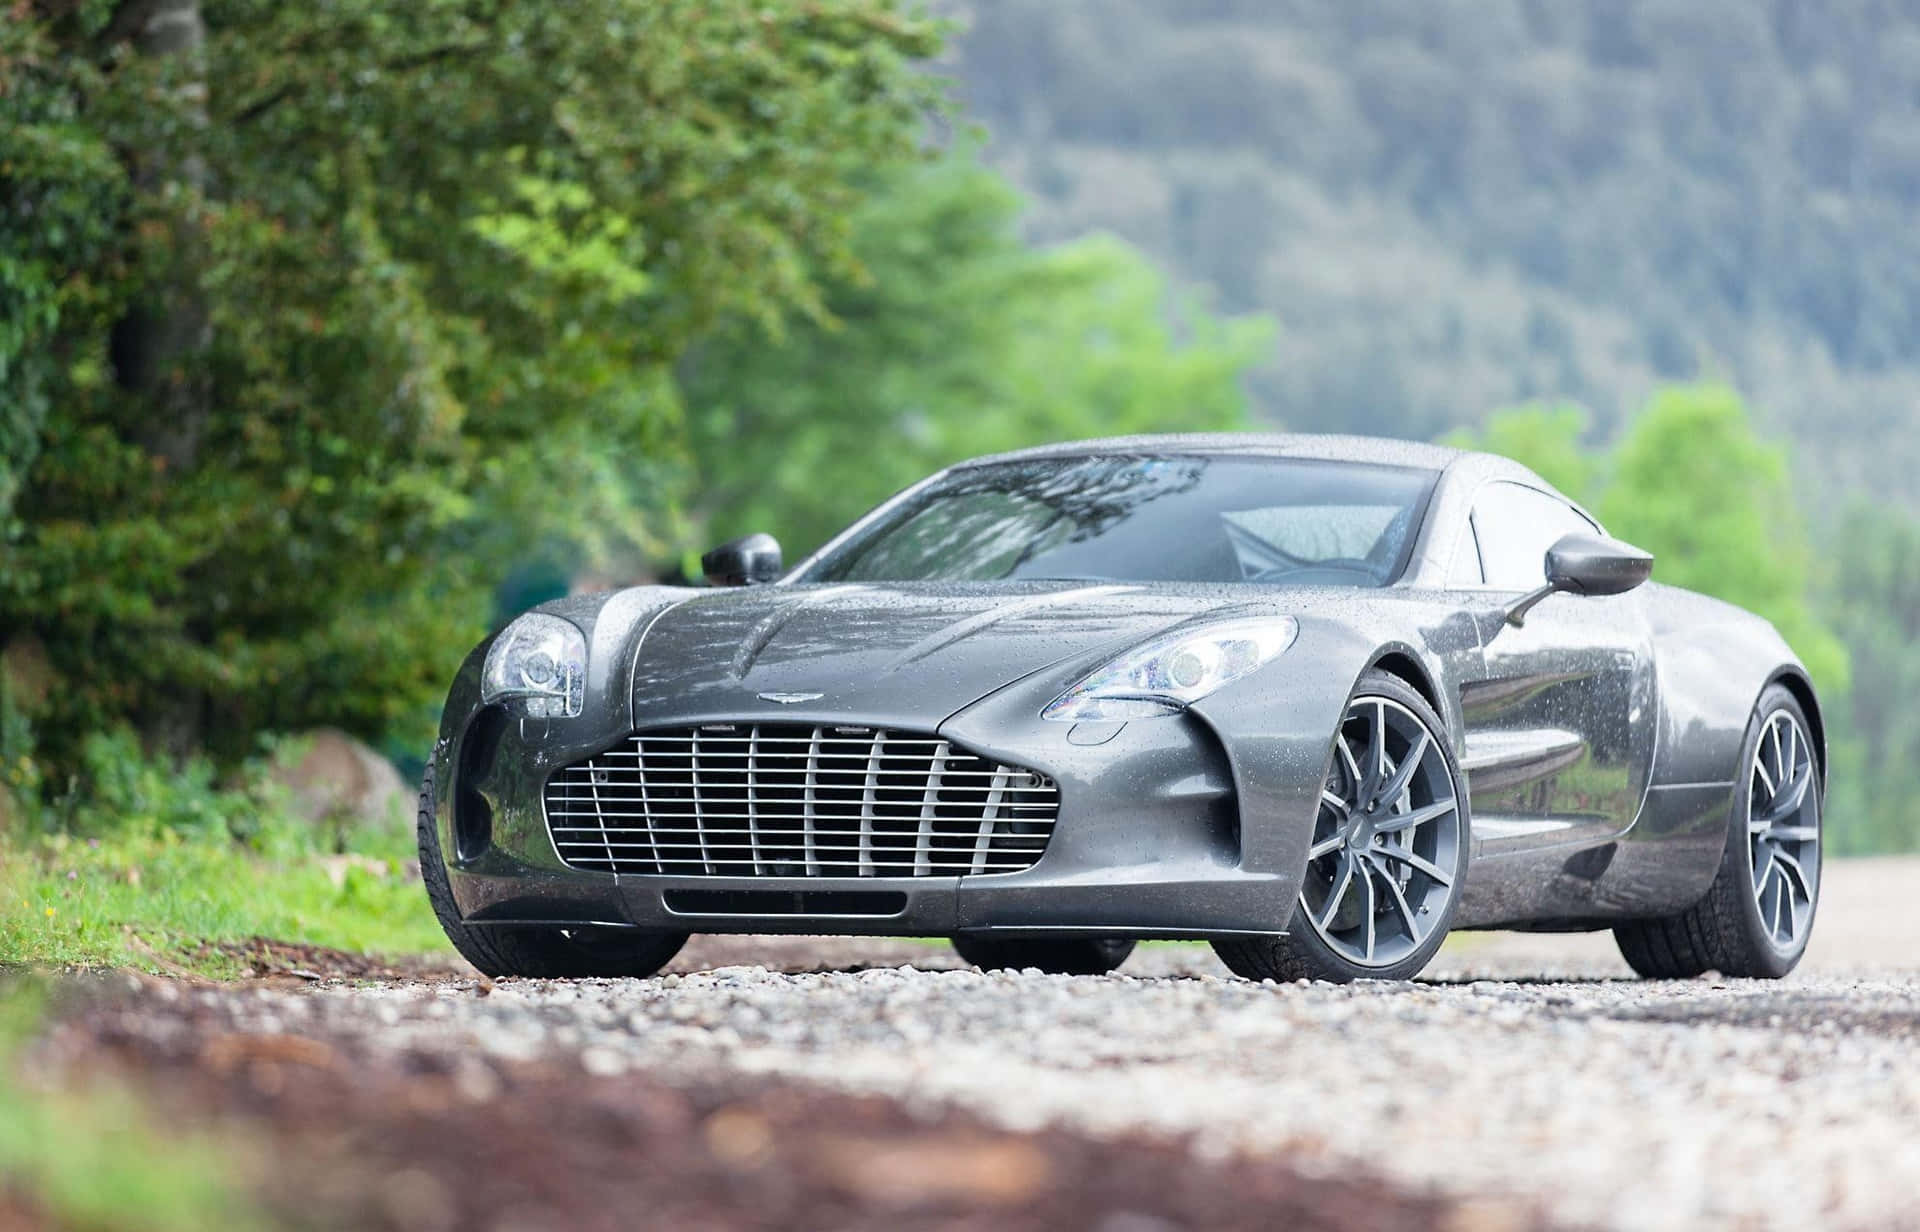 Captivating Aston Martin One-77 in Action Wallpaper